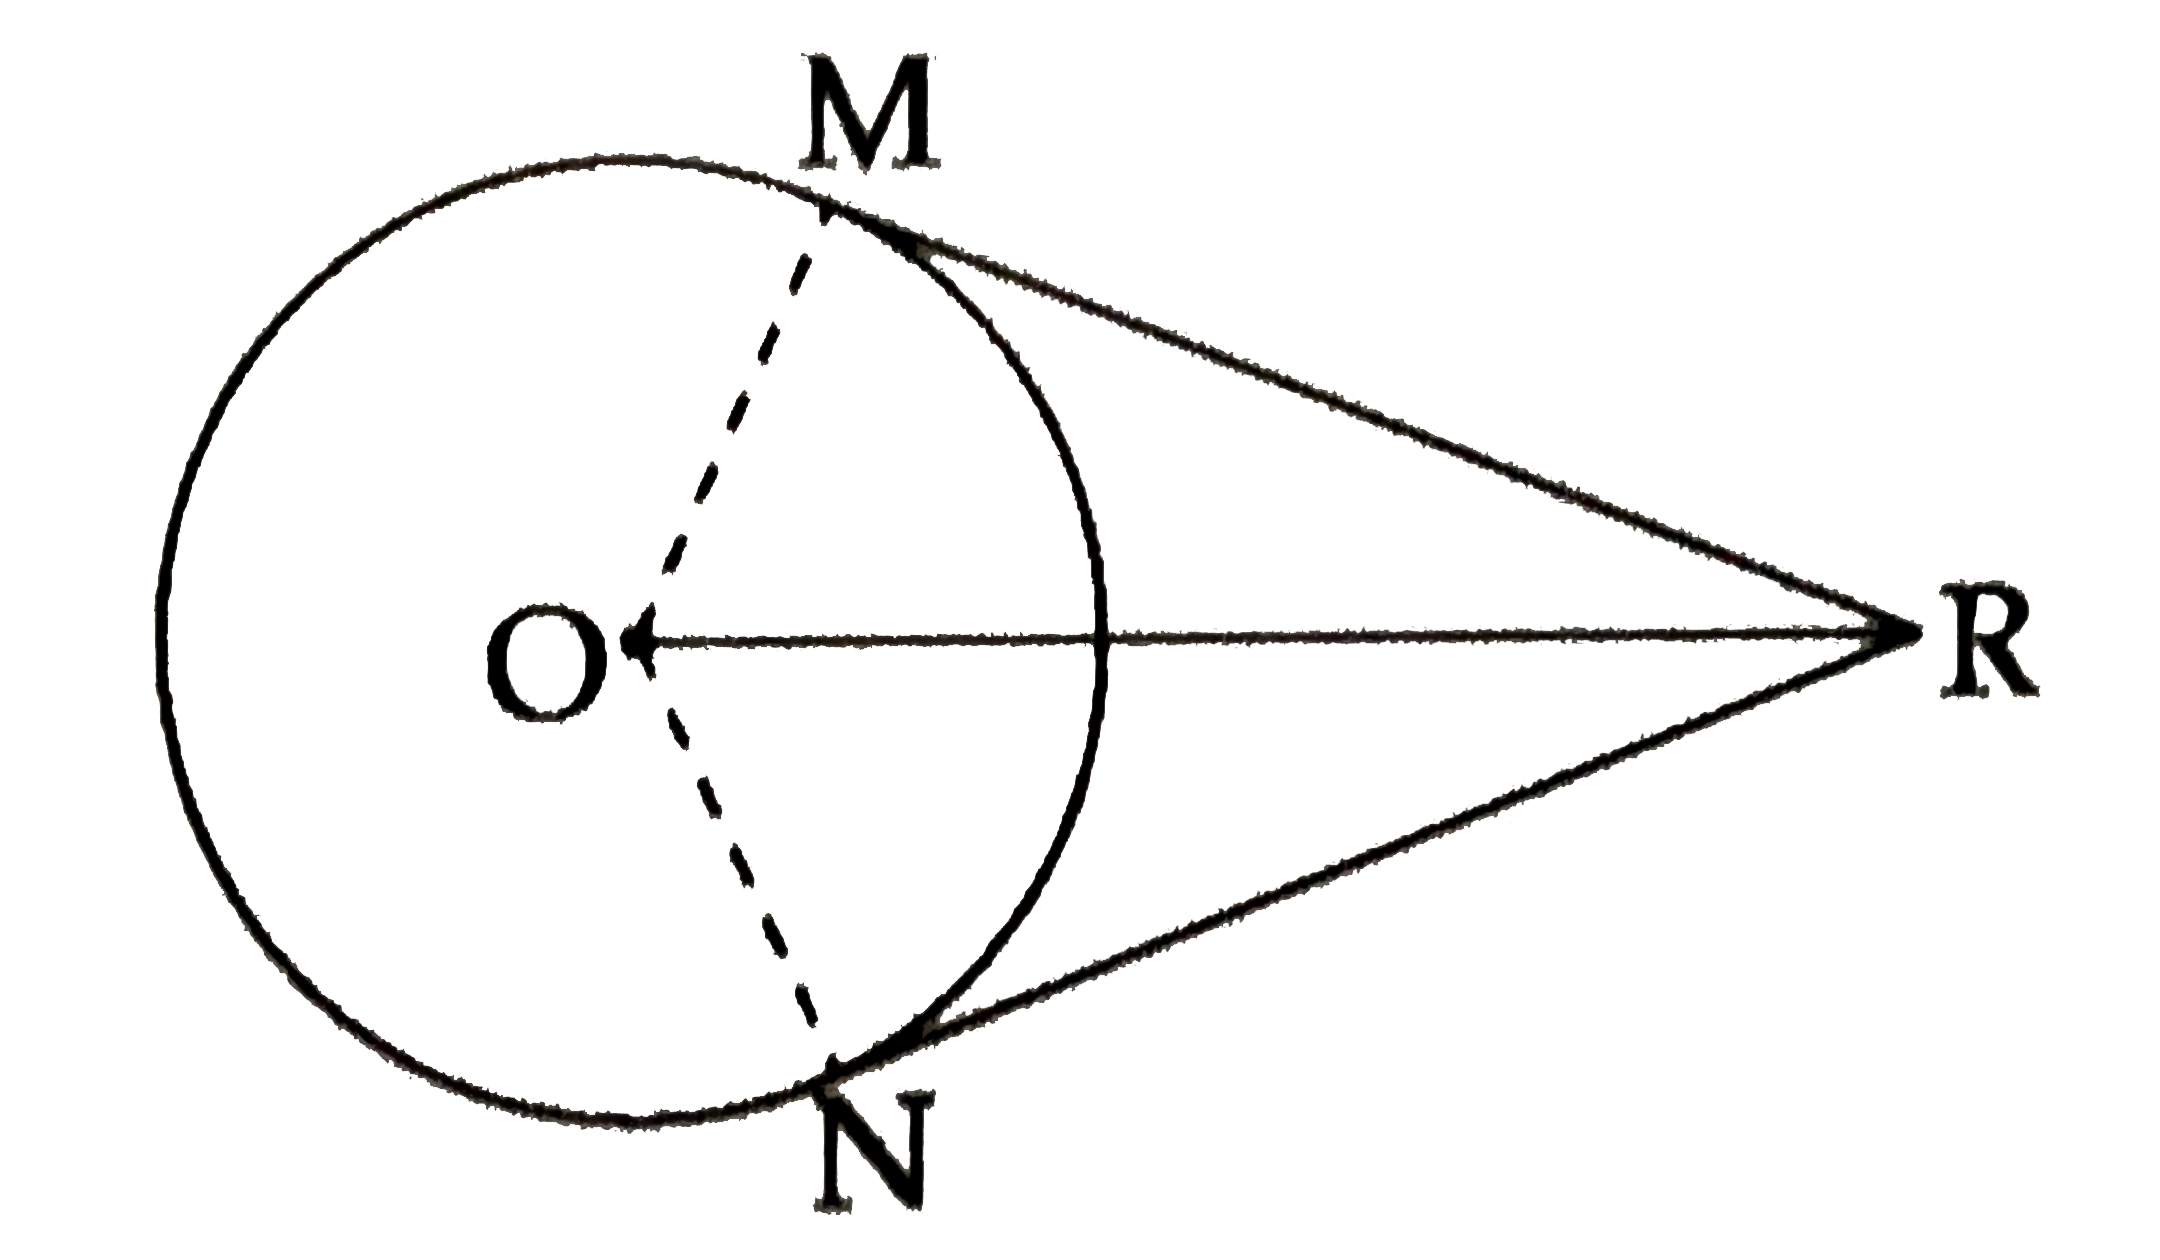 In  the adjoining figure, O is the centre of the circle. From  point R, seg RM and  RN are tangent segments drawn which touch the circle at M, N . If OR = 10  cm, radius  of the circle = 5 cm, then  find      (i)  the length of each tangent segment     (ii)   Measure of  angleMRO      (iii)  Measure of  angleMRN